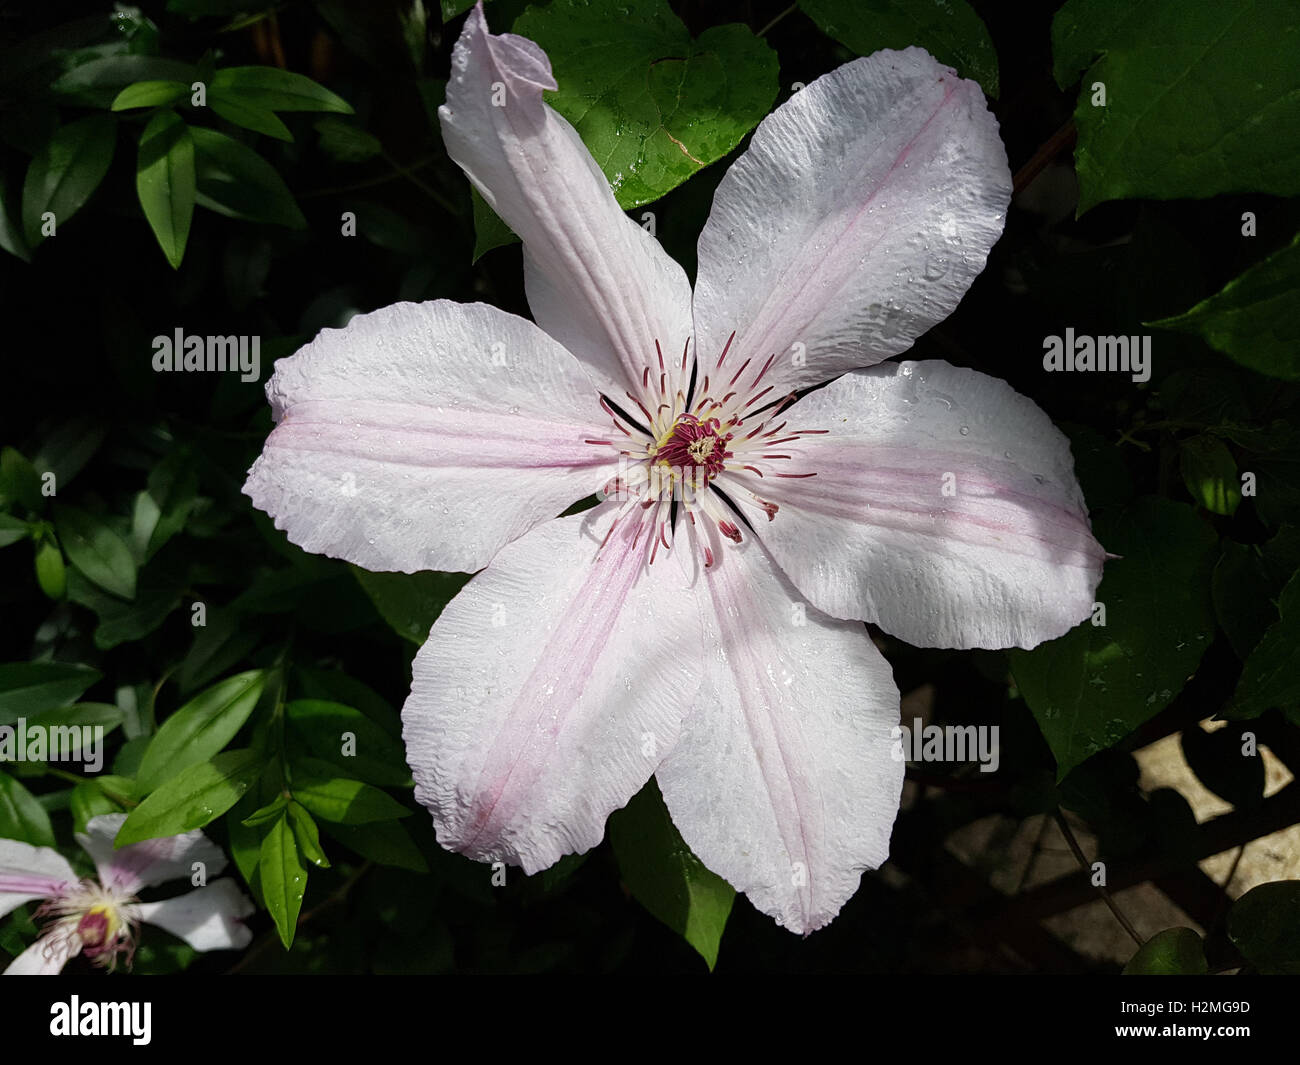 Clematis-Hybride, le Coultre Mm. Stockfoto